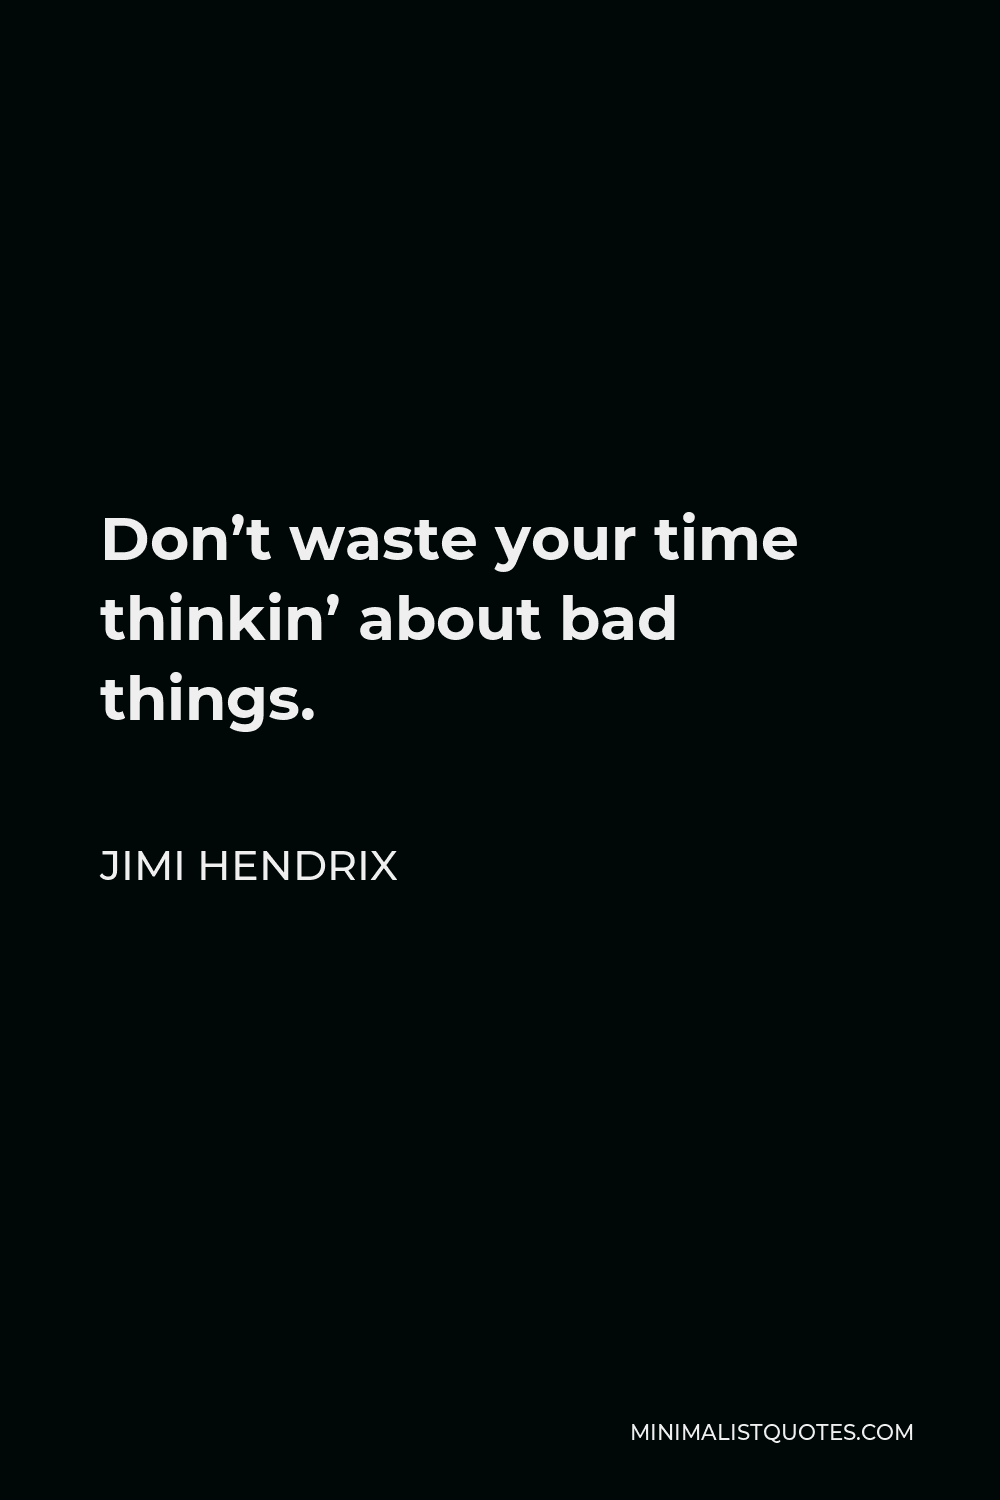 Jimi Hendrix Quote - Don’t waste your time thinkin’ about bad things.